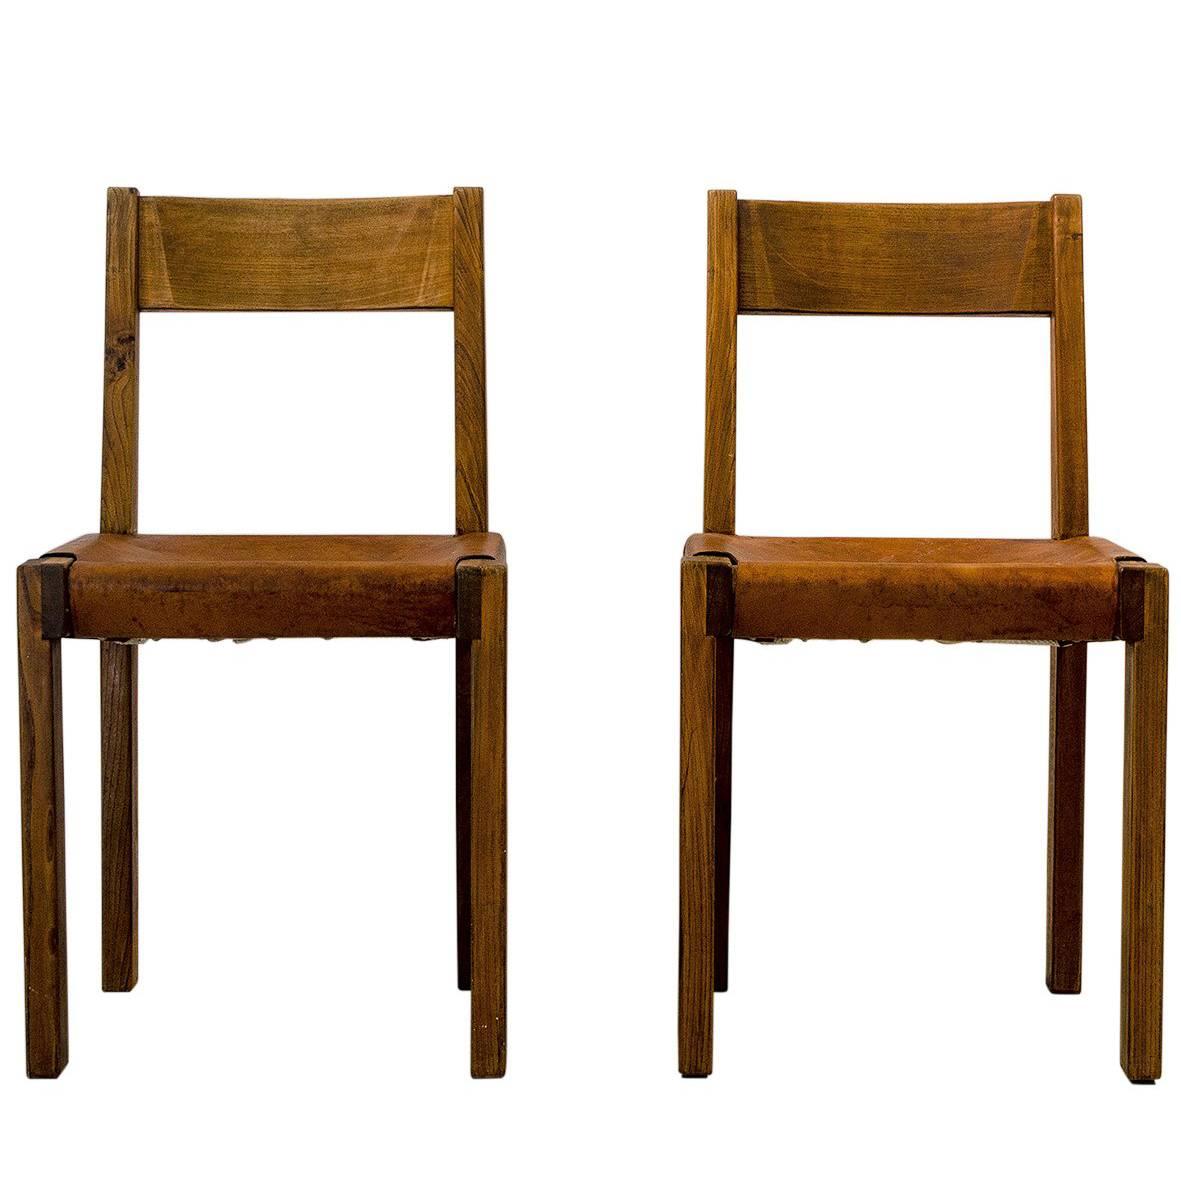 Pair of Pierre Chapo Midcentury Elmwood and Leather French Chairs, 1960s